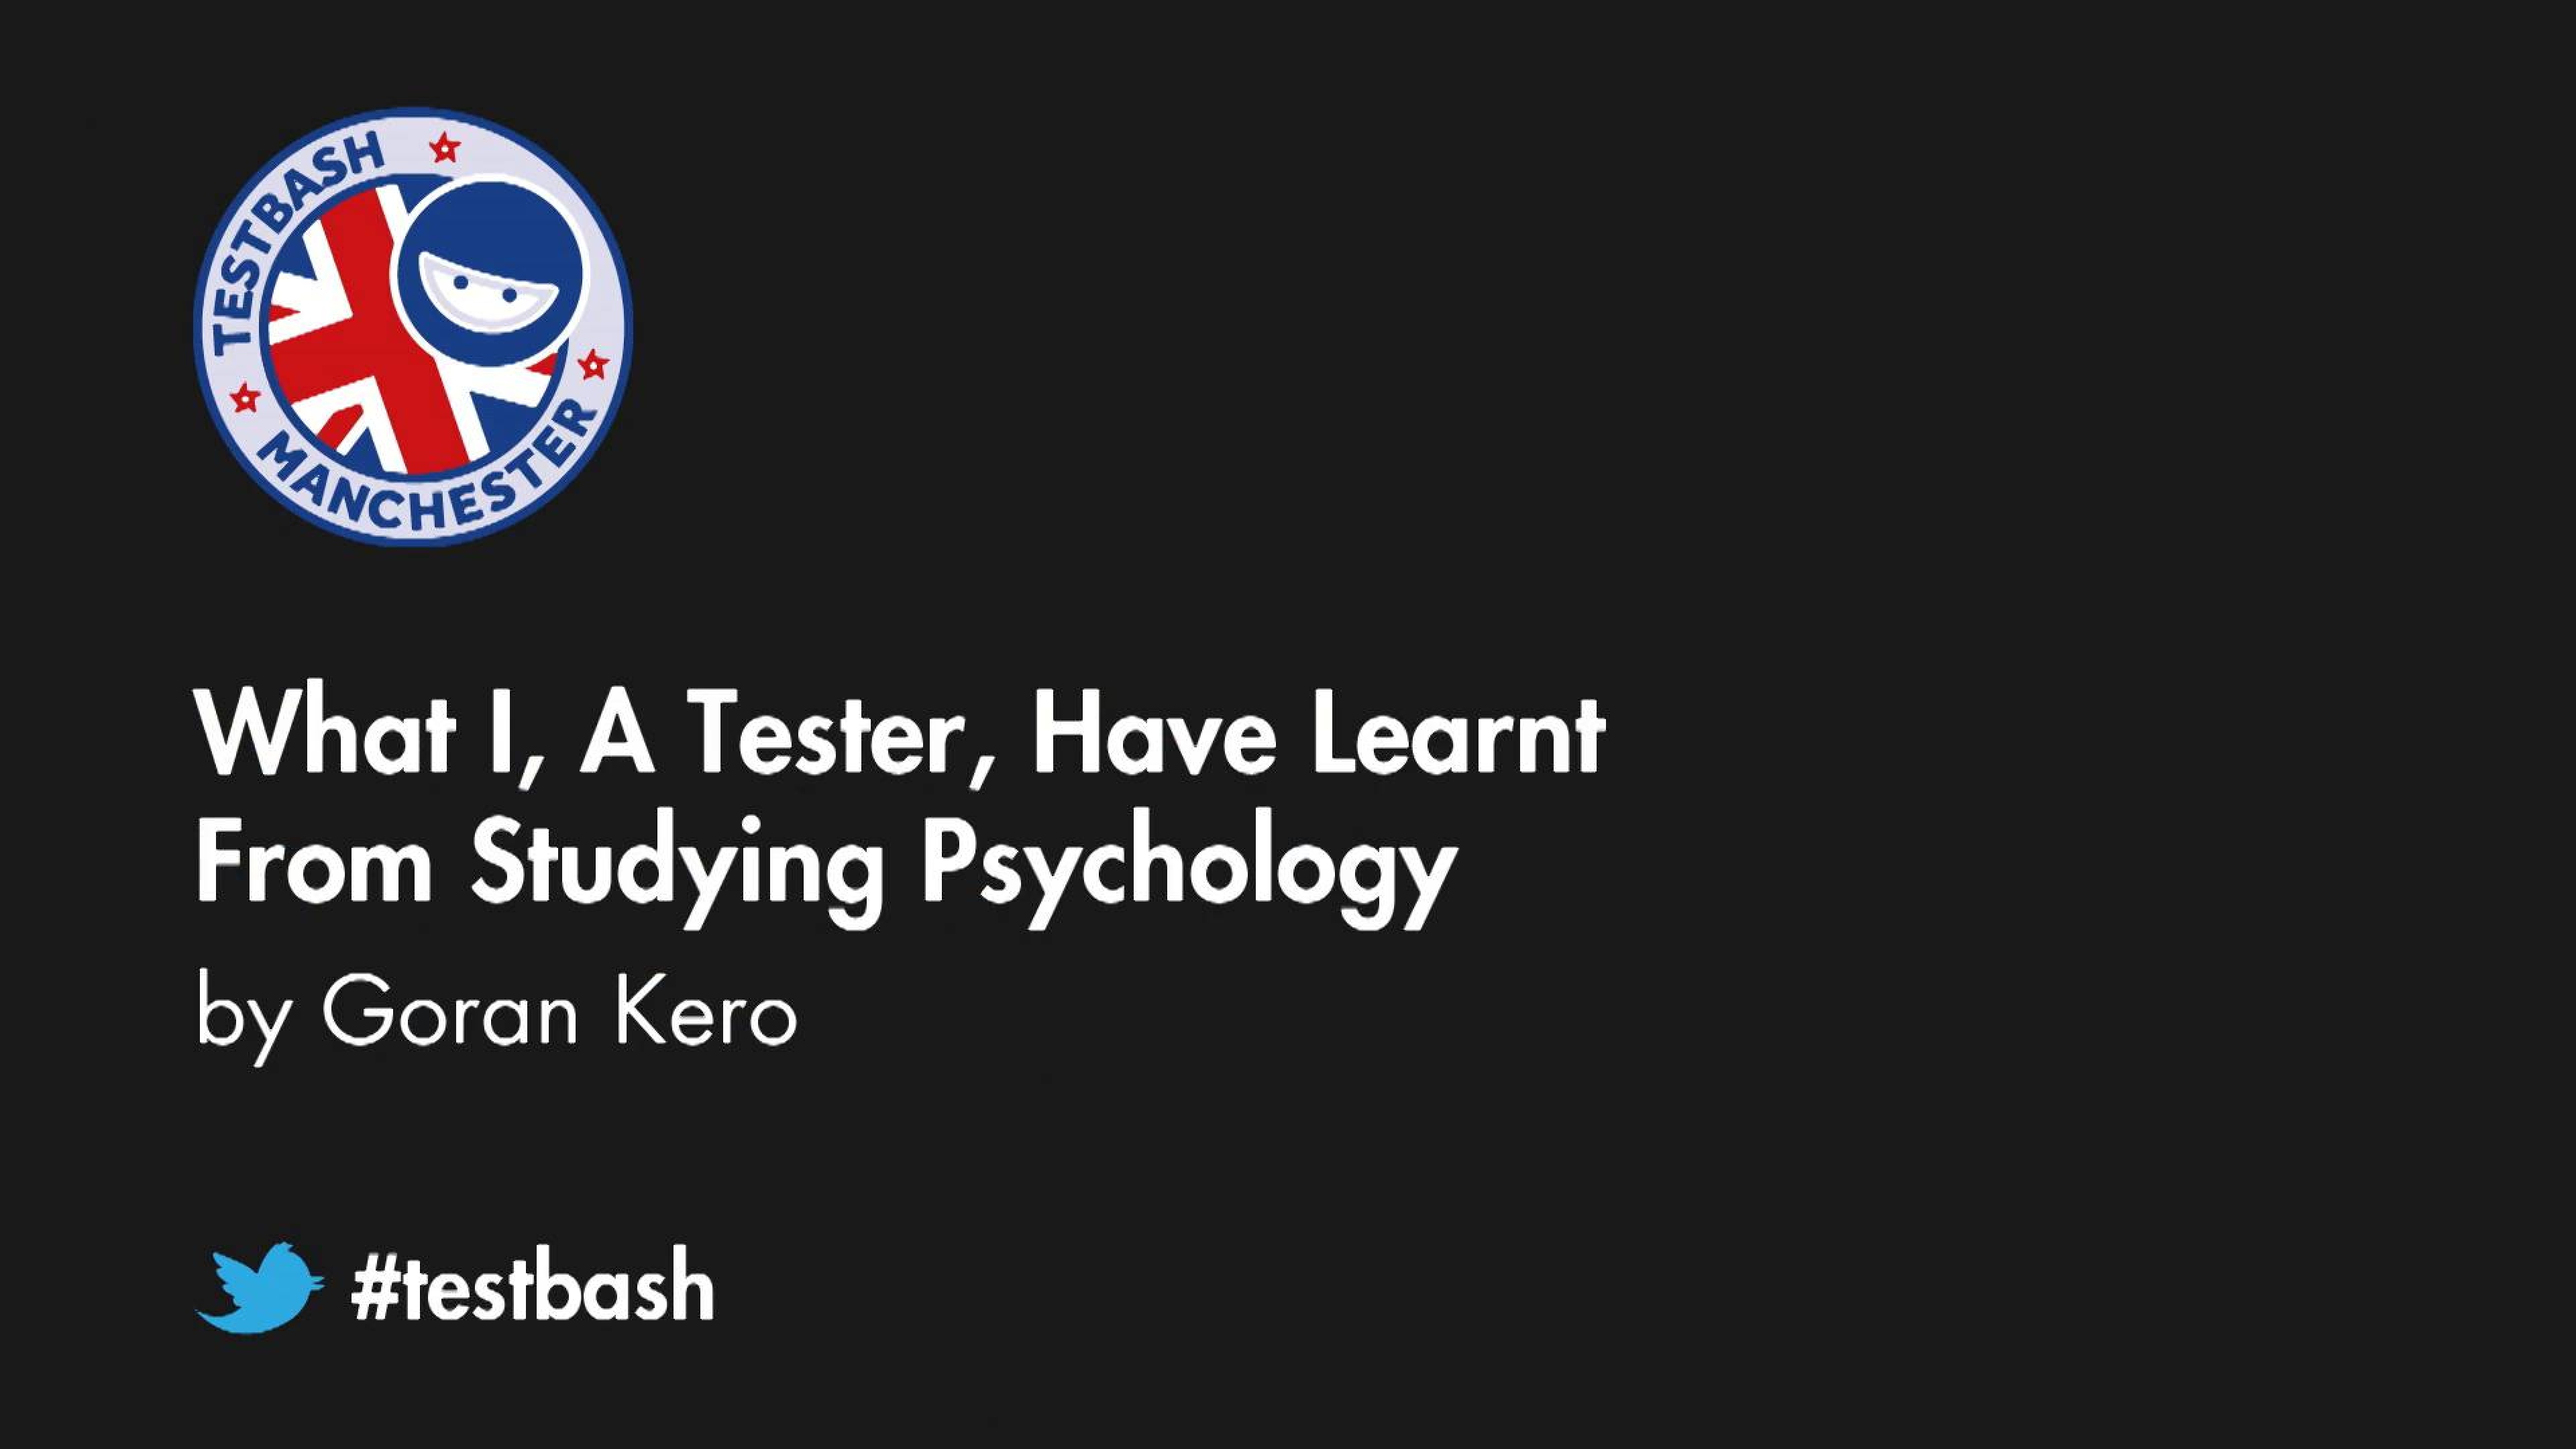 What I, A Tester, Have Learnt From Studying Psychology - Göran Kero